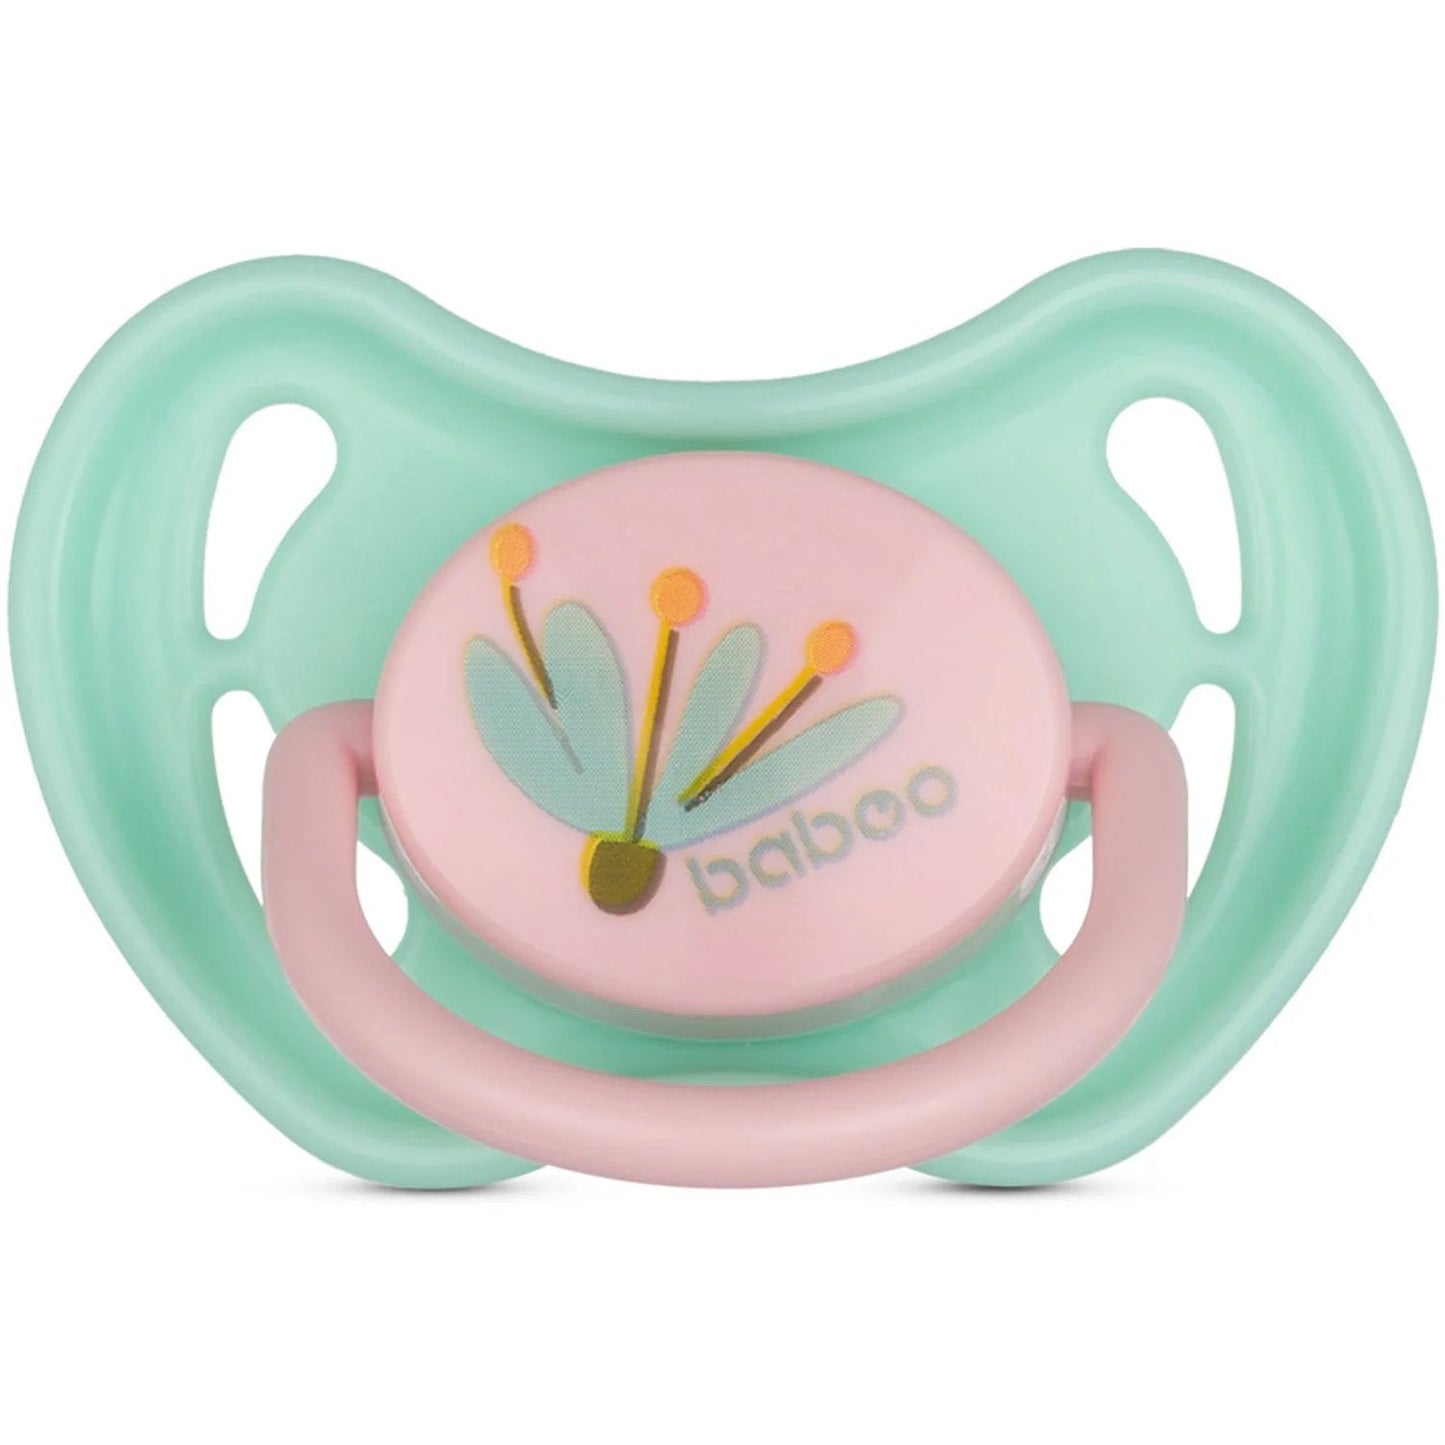 Baboo Soother Latex Cherry PP 0+ Flora